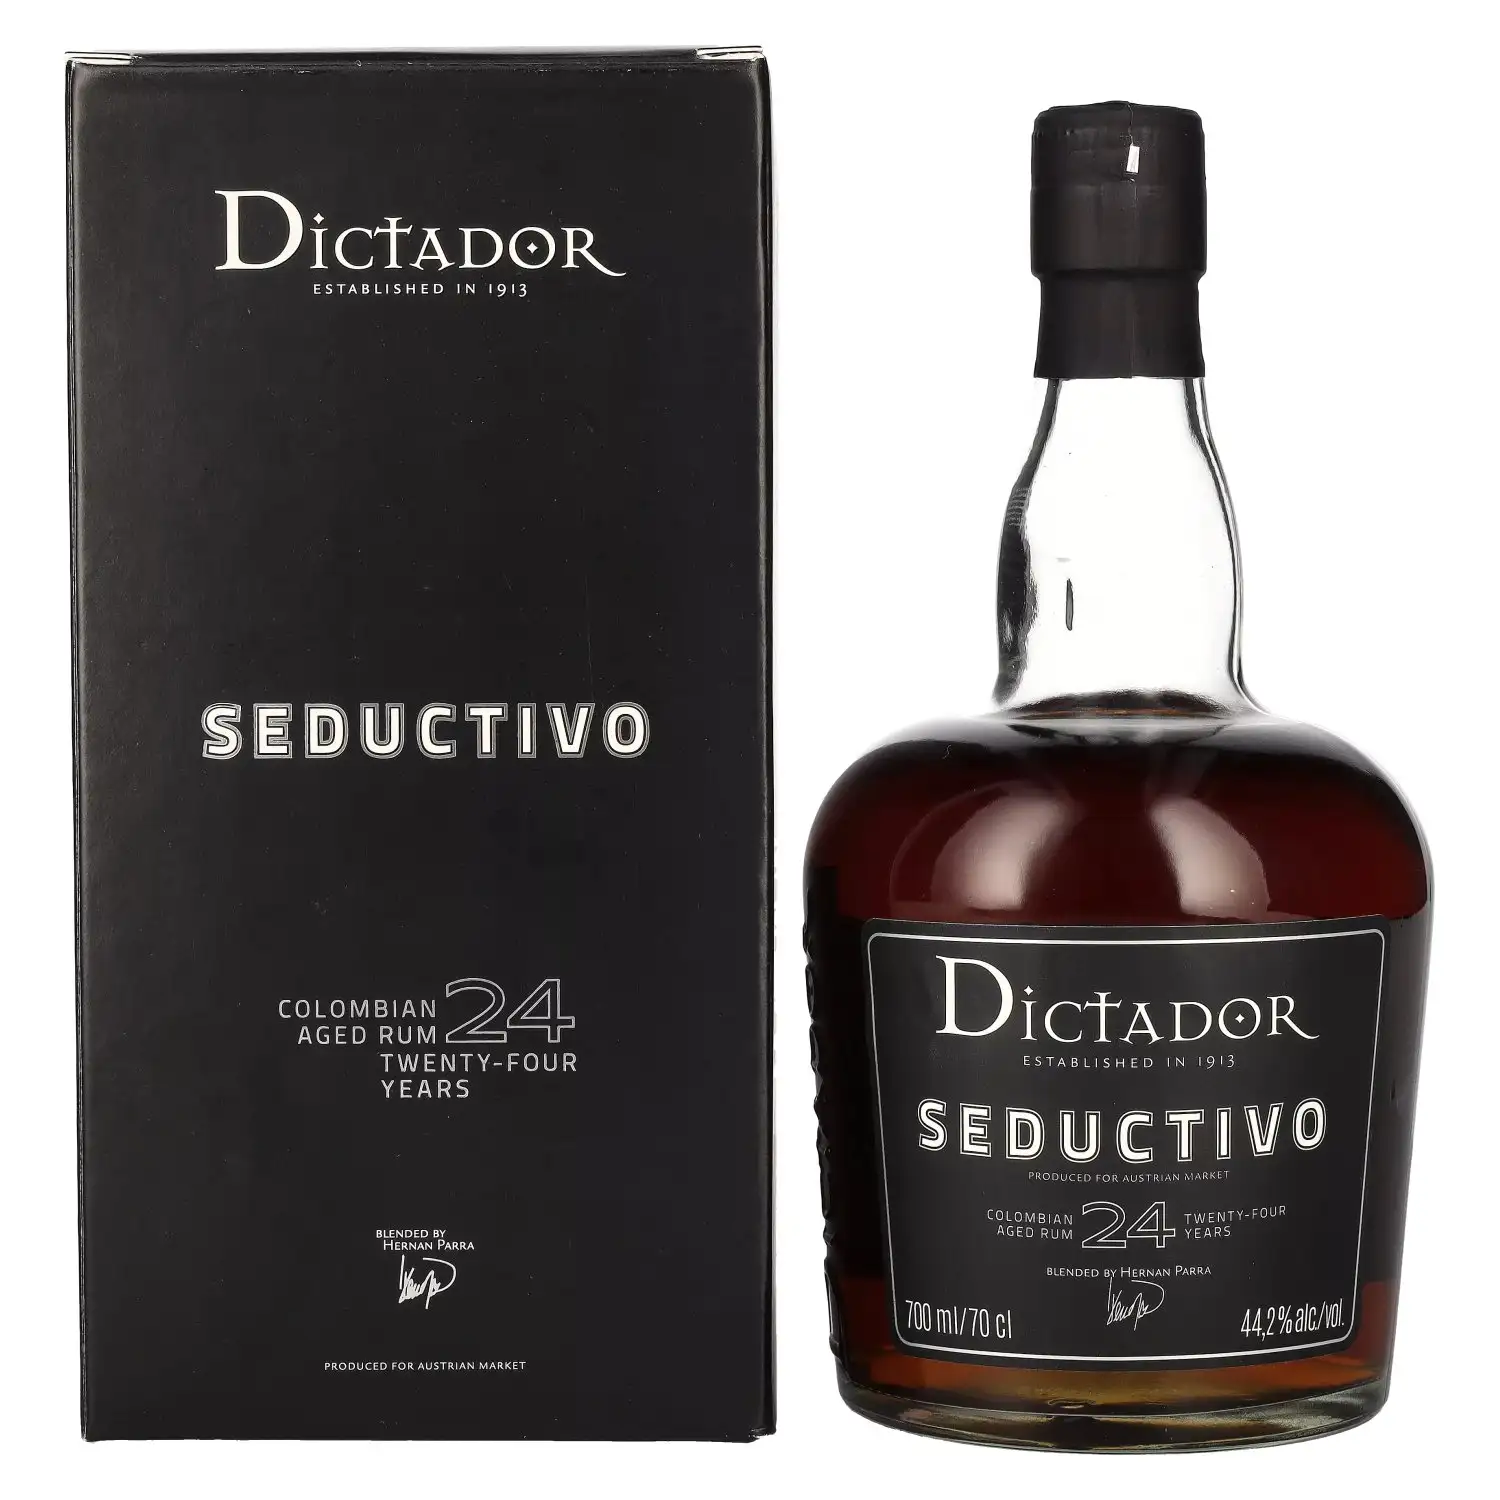 Image of the front of the bottle of the rum Dictador SEDUCTIVO